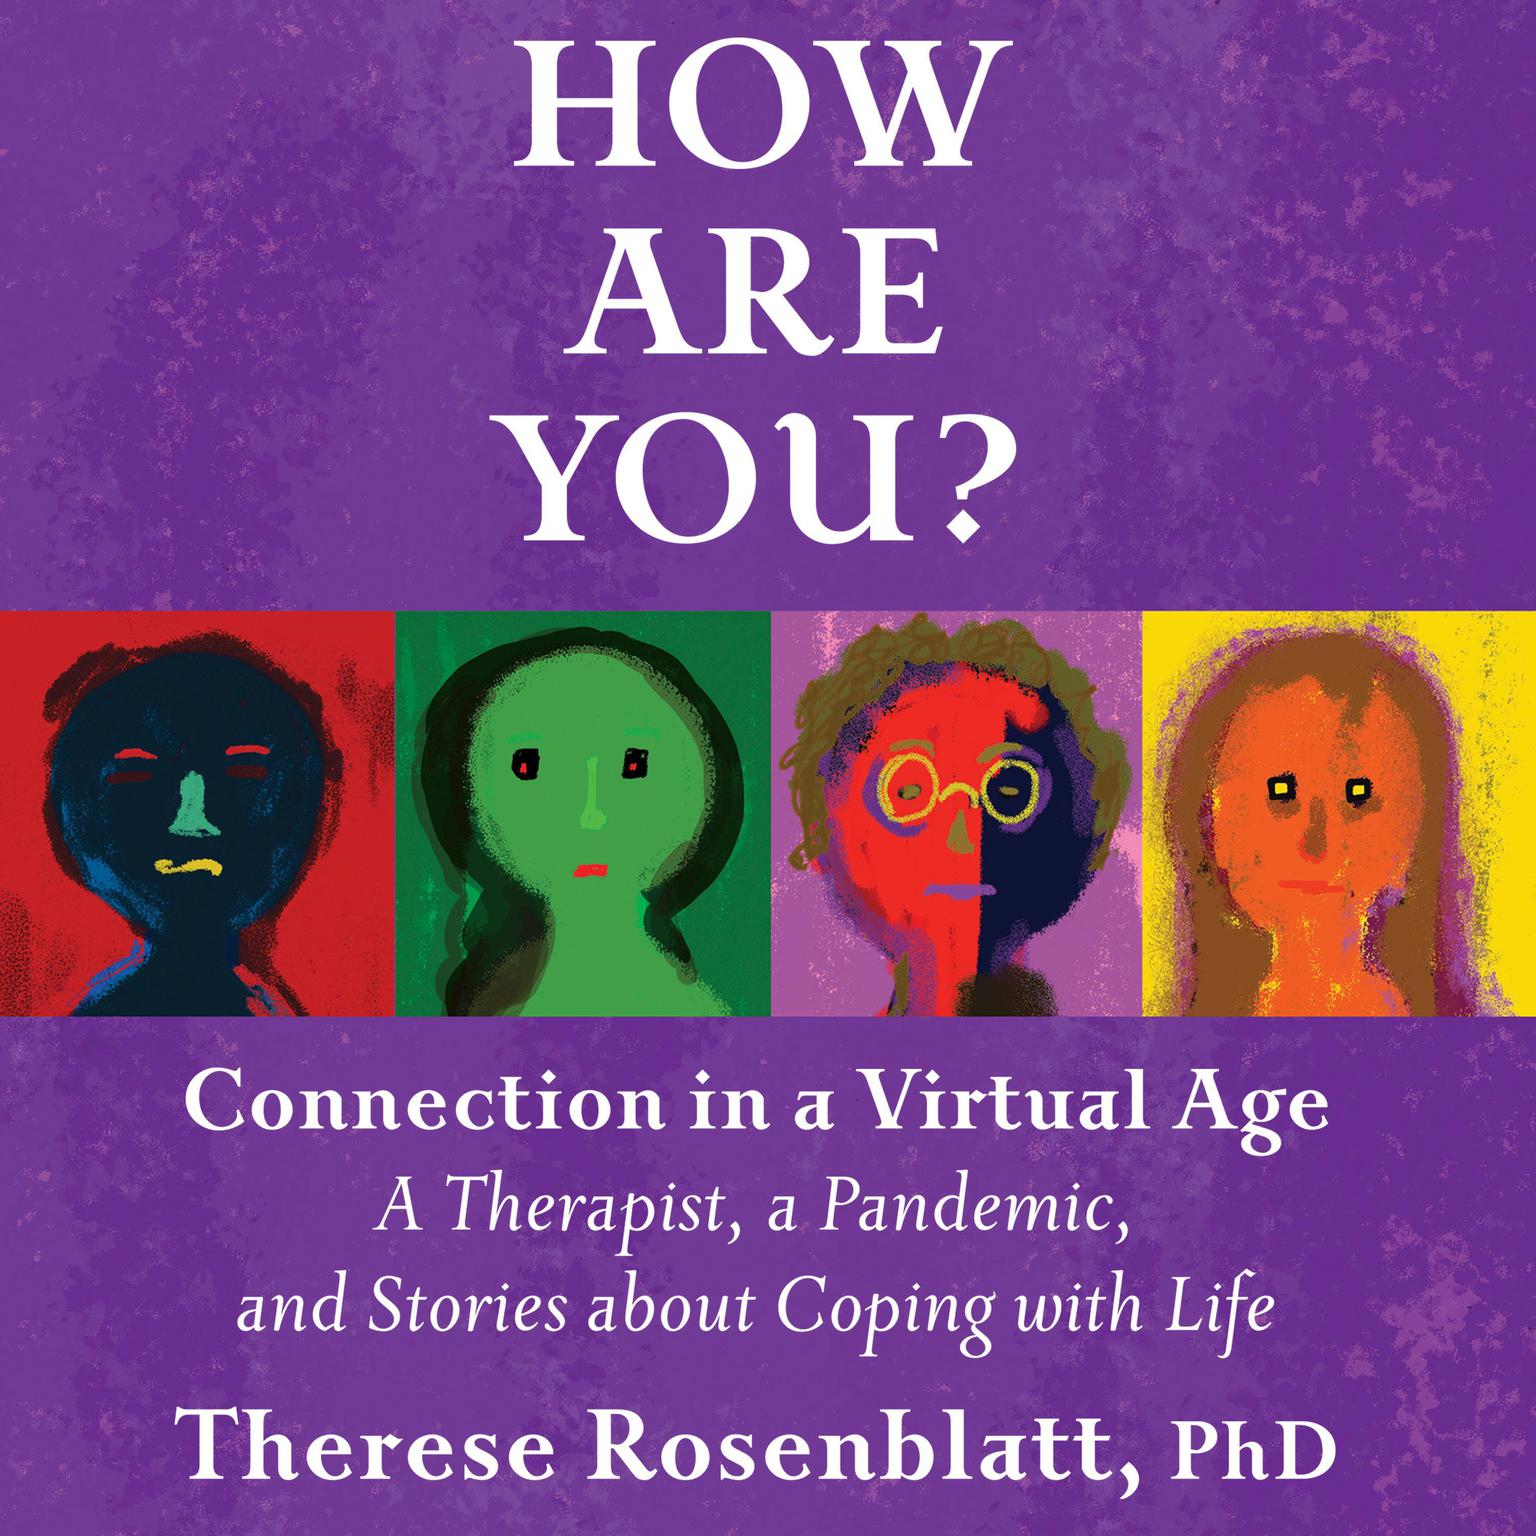 How Are You? Connection in a Virtual Age: A Therapist, a Pandemic, and Stories about Coping with Life Audiobook, by Therese Rosenblatt